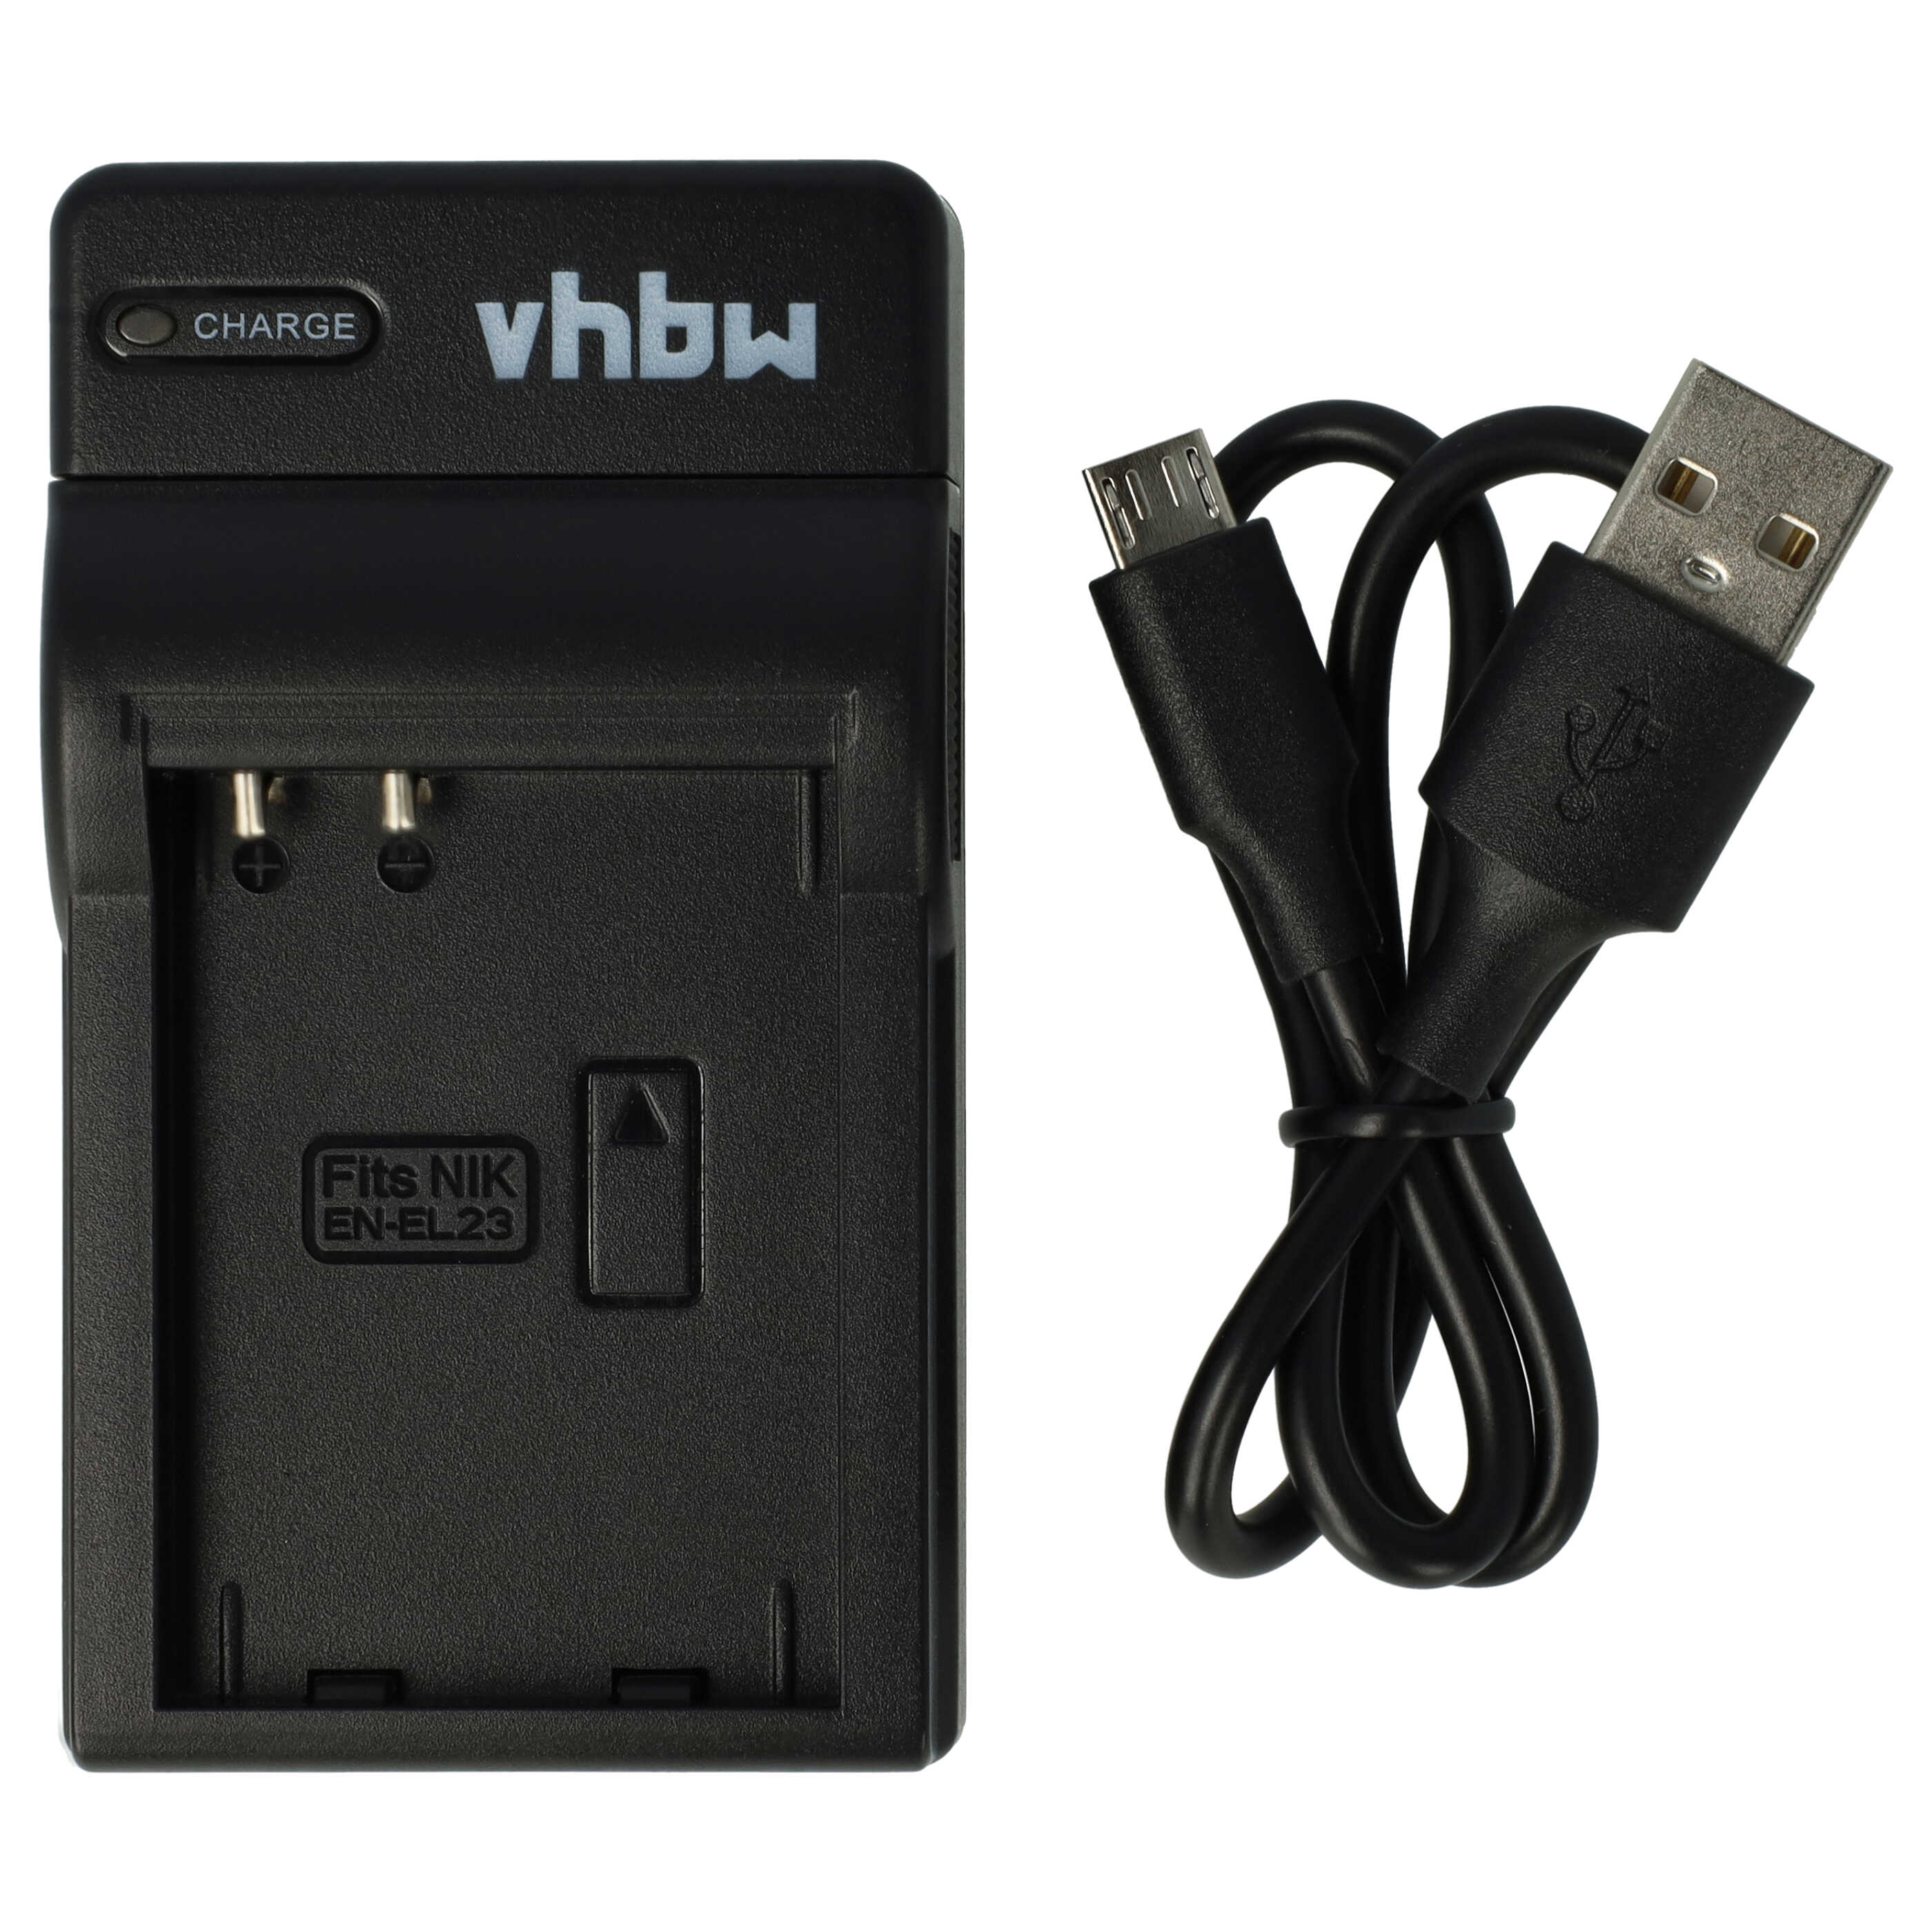 Battery Charger replaces Nikon MH-67P suitable for Coolpix P600 Camera etc. - 0.5 A, 4.35 V